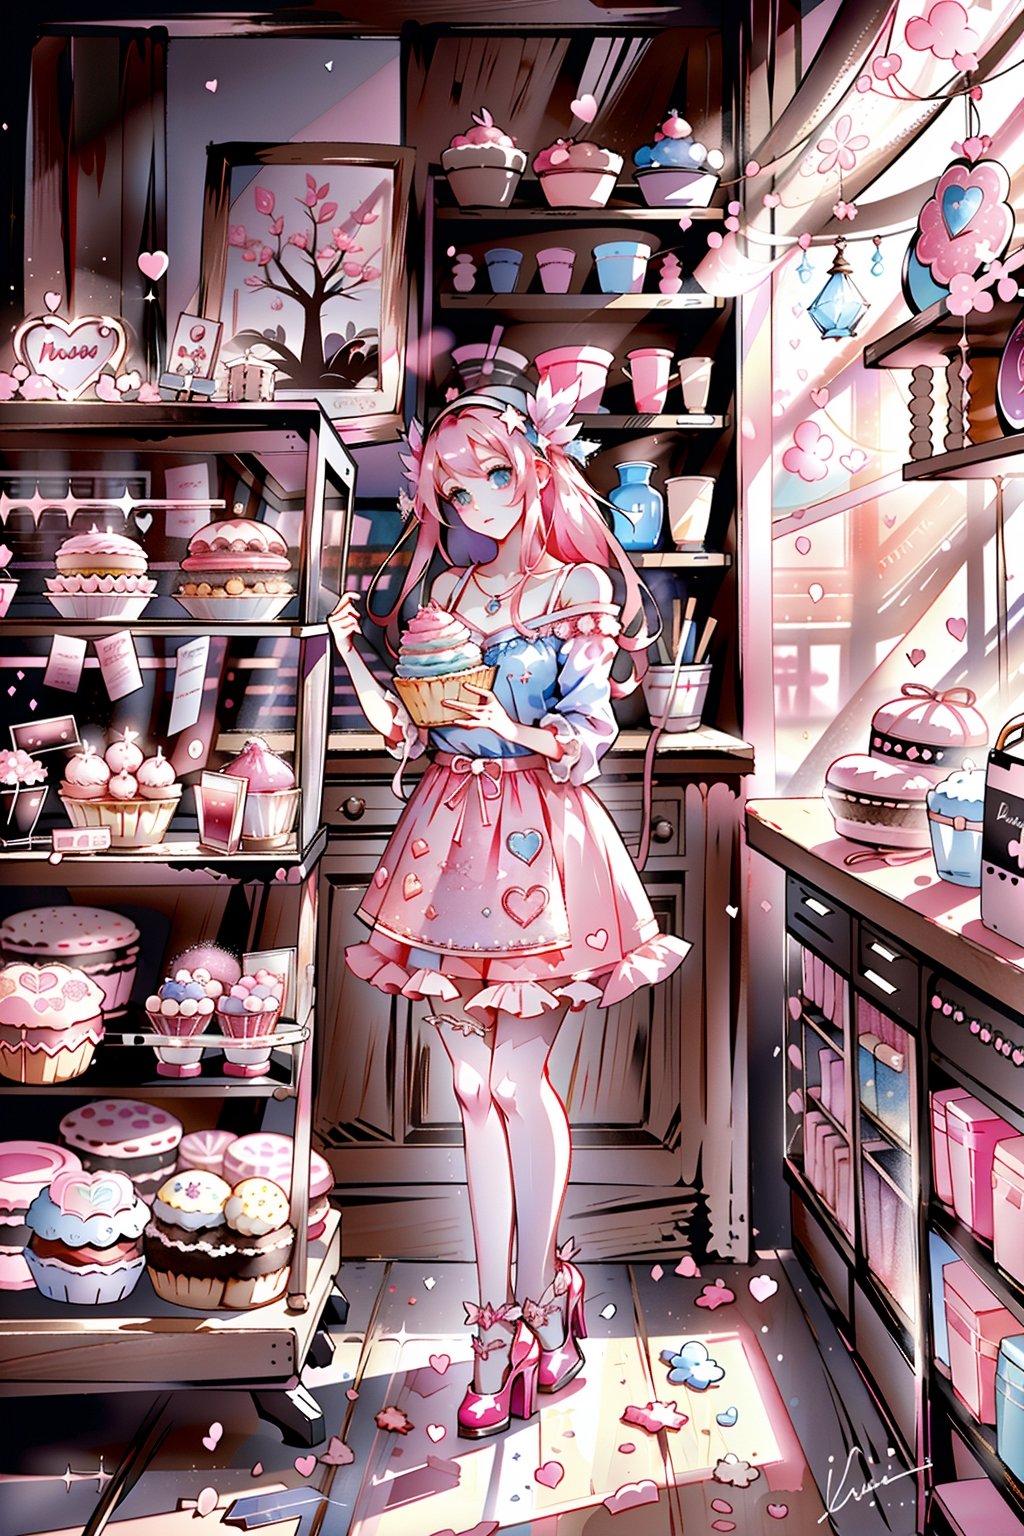 (masterpiece,  best quality,  highres:1.3), ultra resolution image,  (1girl),  (solo),  kawaii, pink hair, blue, (sweet charm:1.4),  pies,  fresh baked bread, macarons, wooden shelves with cupcakes, bakery, shop, scenery, soft, cozy, glitter,Kanna Kamui, ,Hori,1 girl